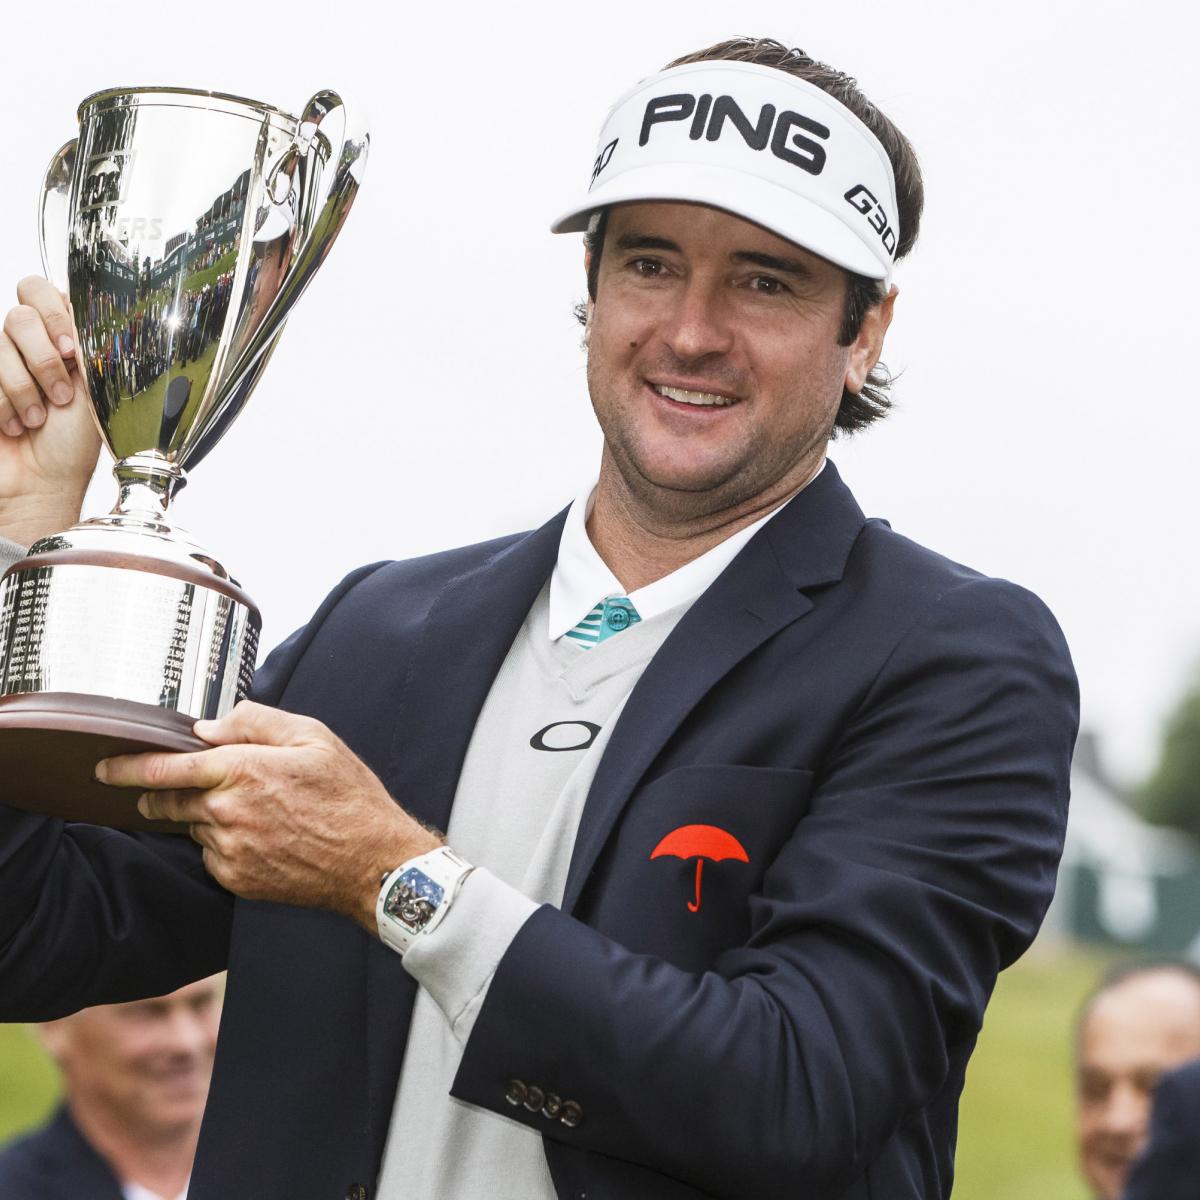 Will Win at the Travelers JumpStart Bubba Watson in Time for the